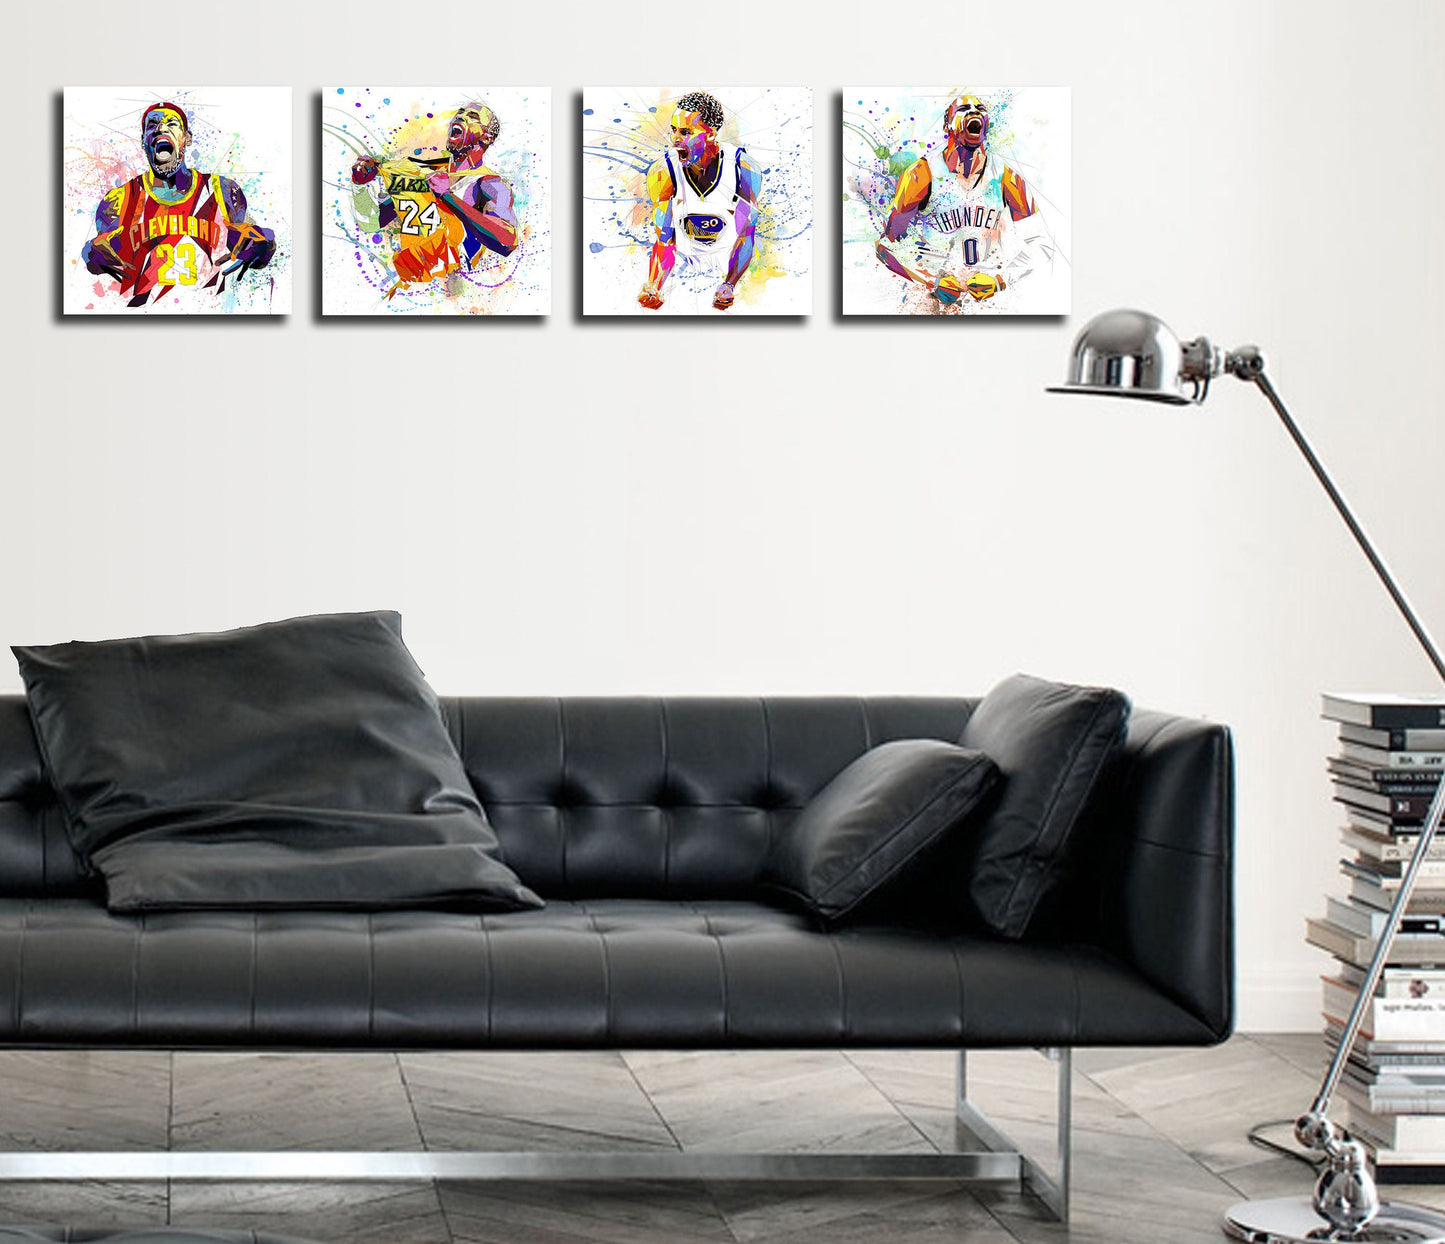 Canvas Print Basketball Wall Art Display Set of 4 or 6, Choose Your Favorite Basketball Players from Katiaskye Online Shop